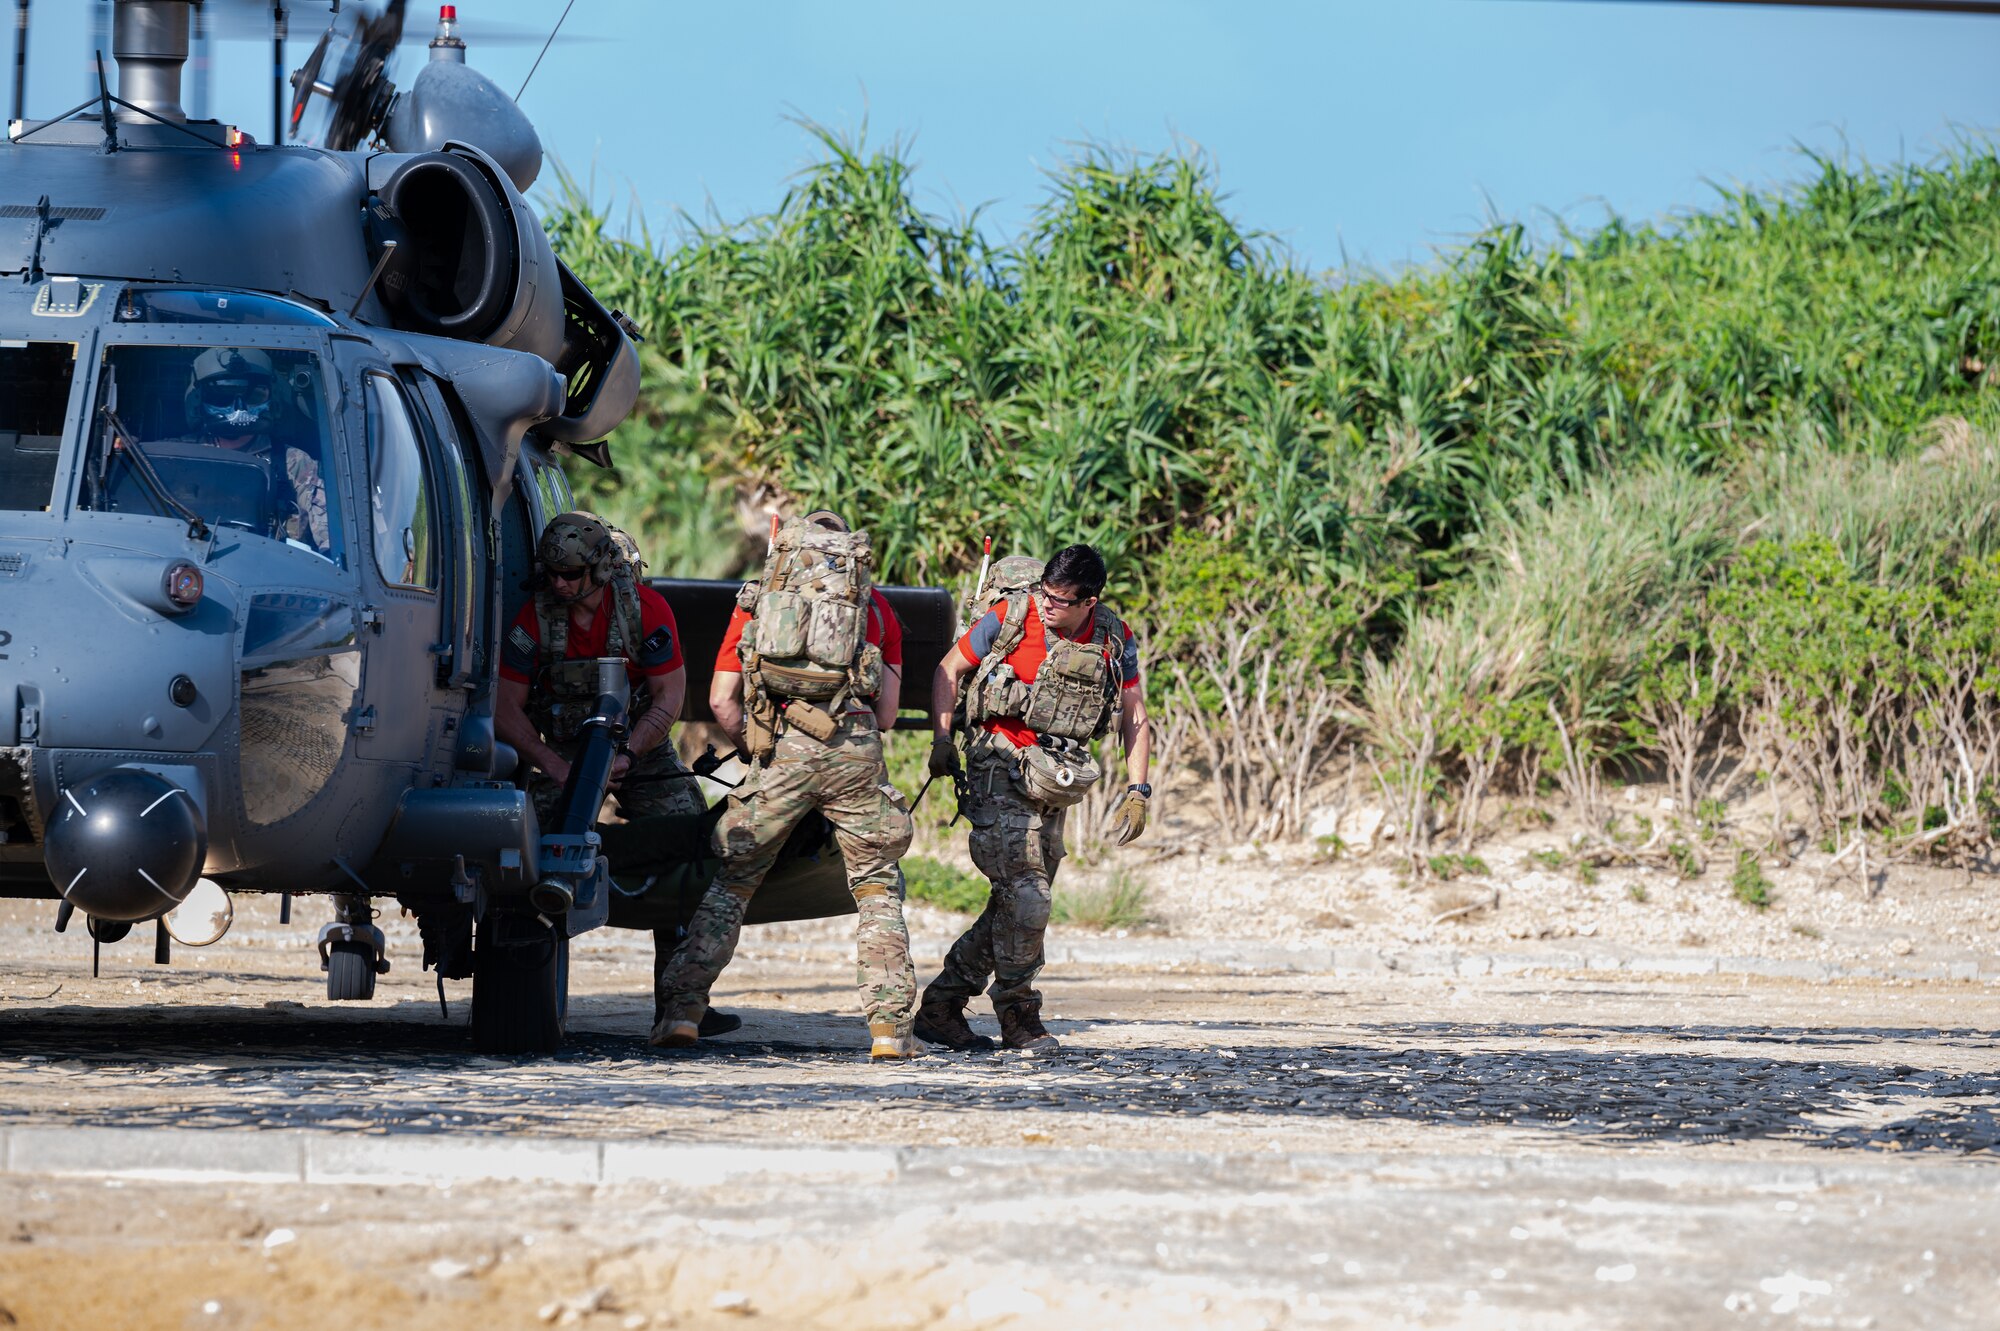 Pararescue jumpers offload from a helicopter.